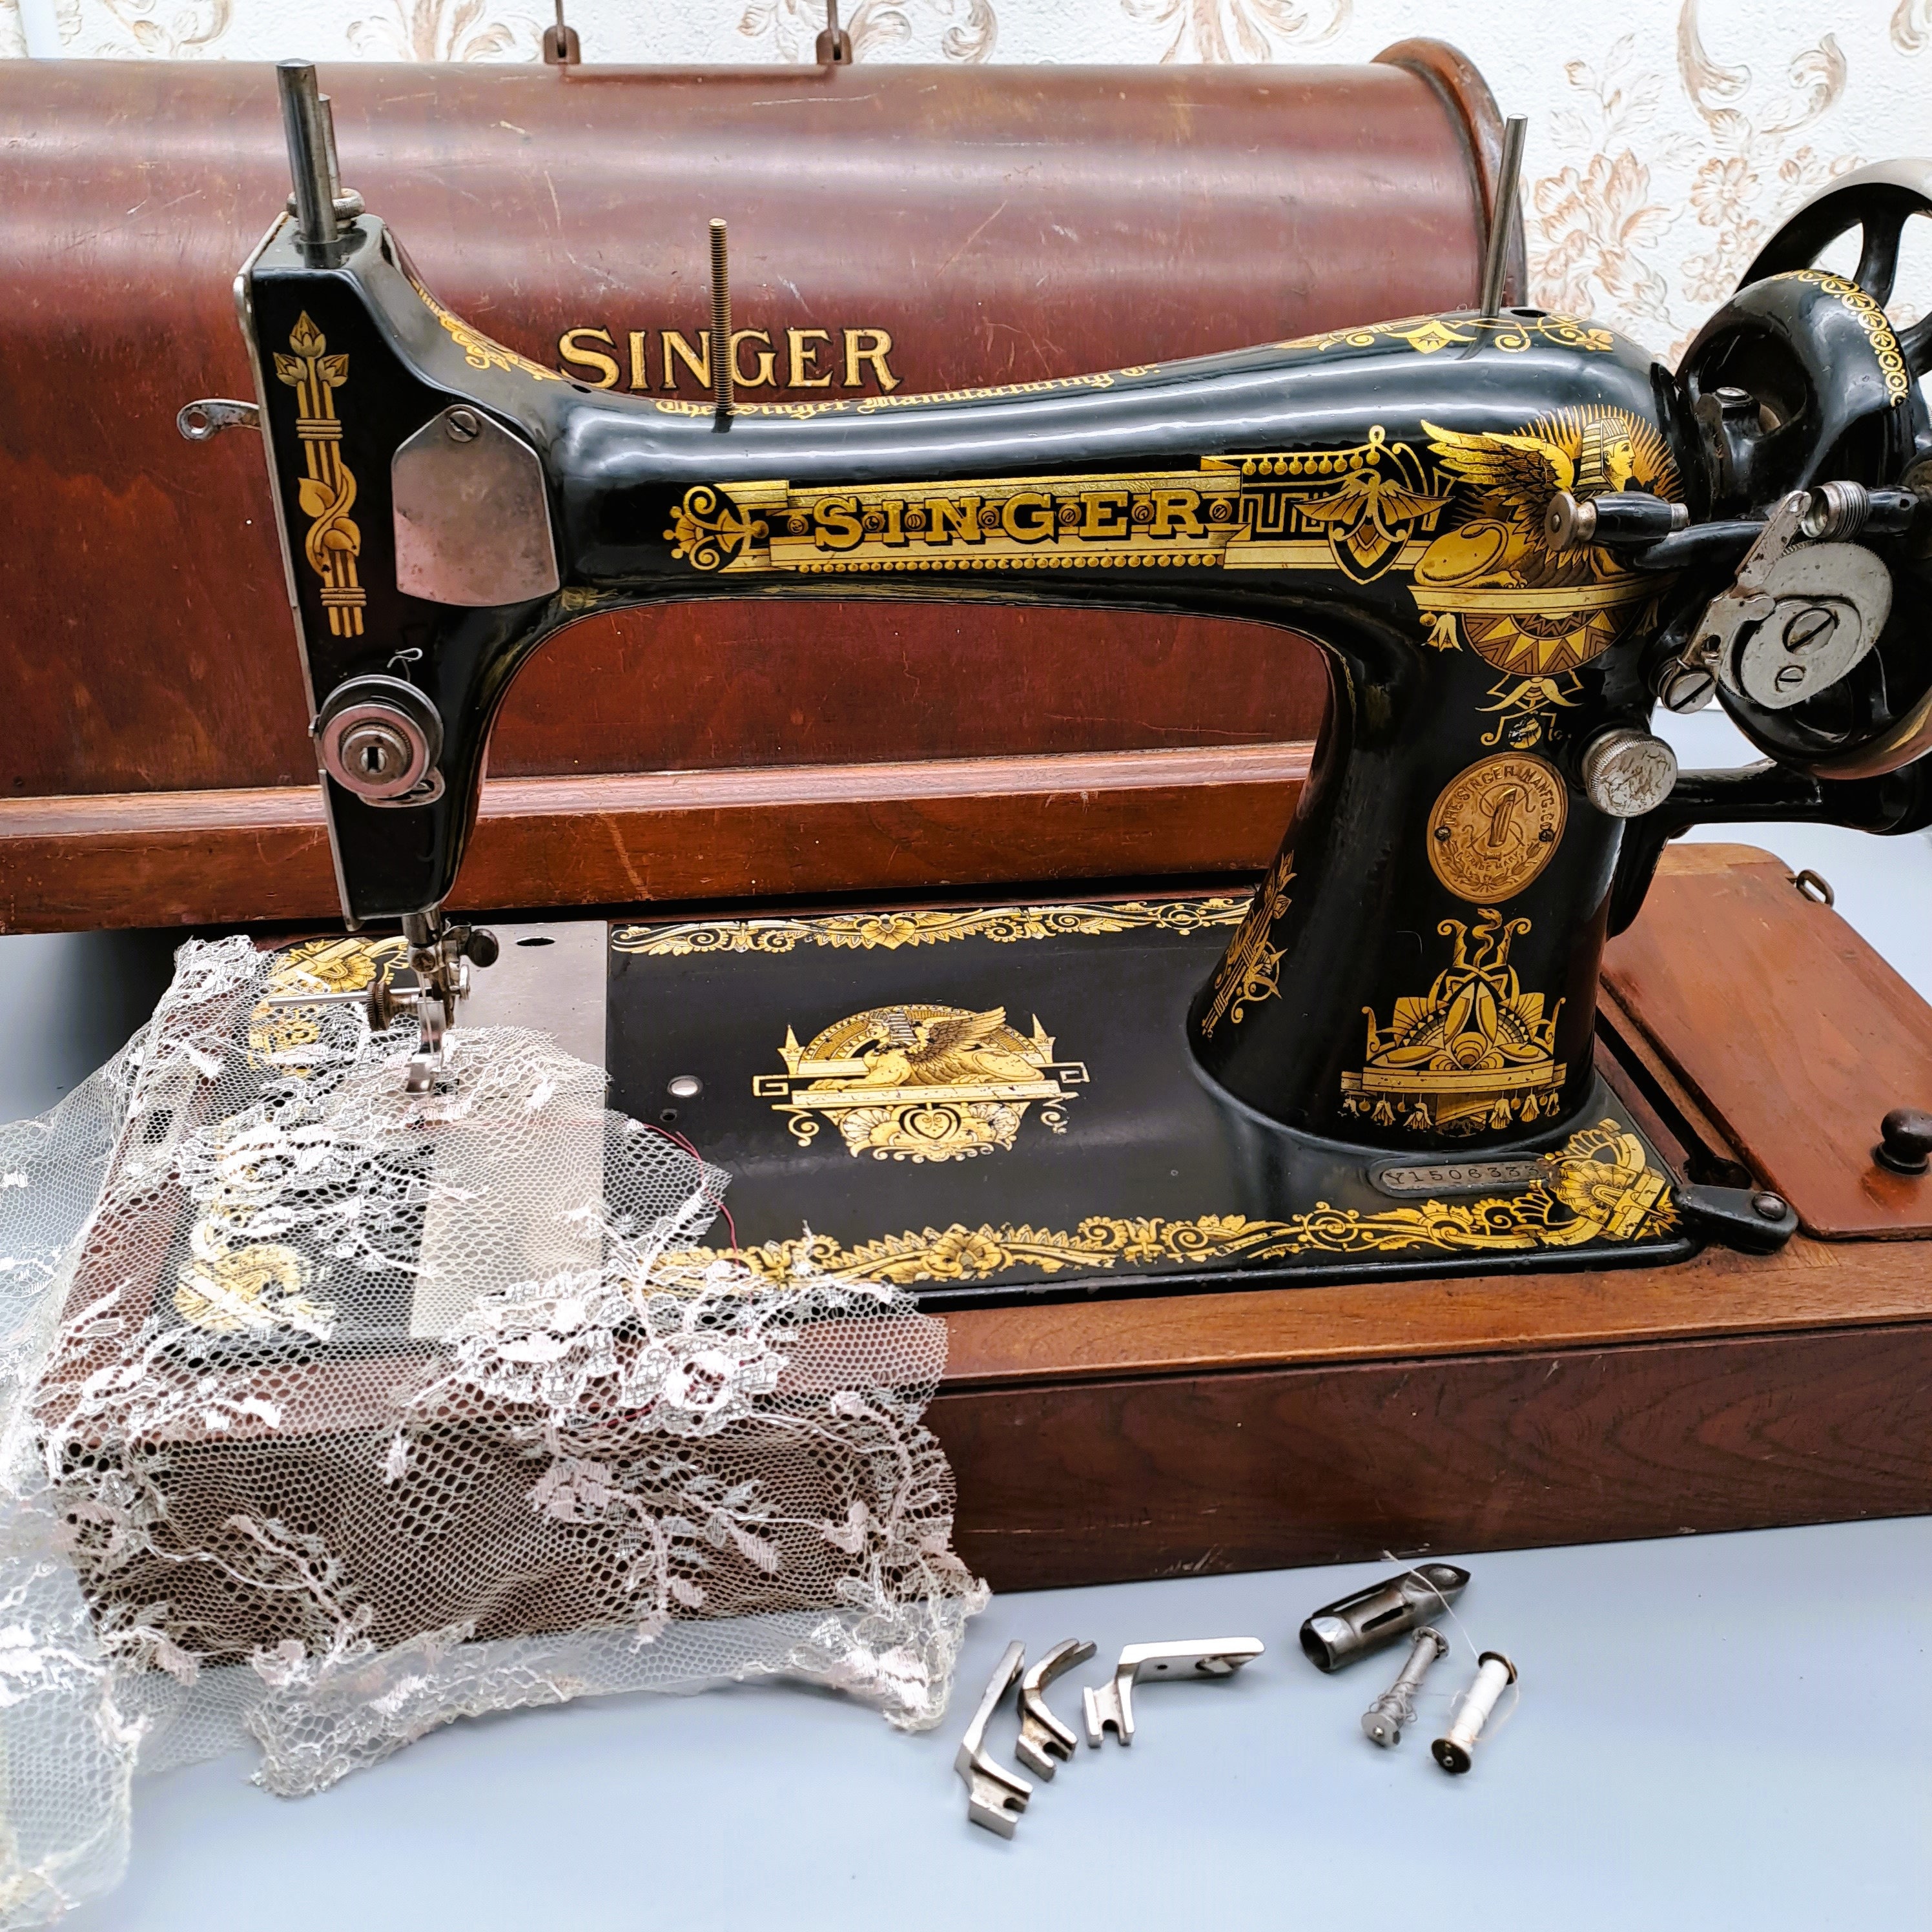 My antique Singer 15 sewing machine < with my hands - Dream